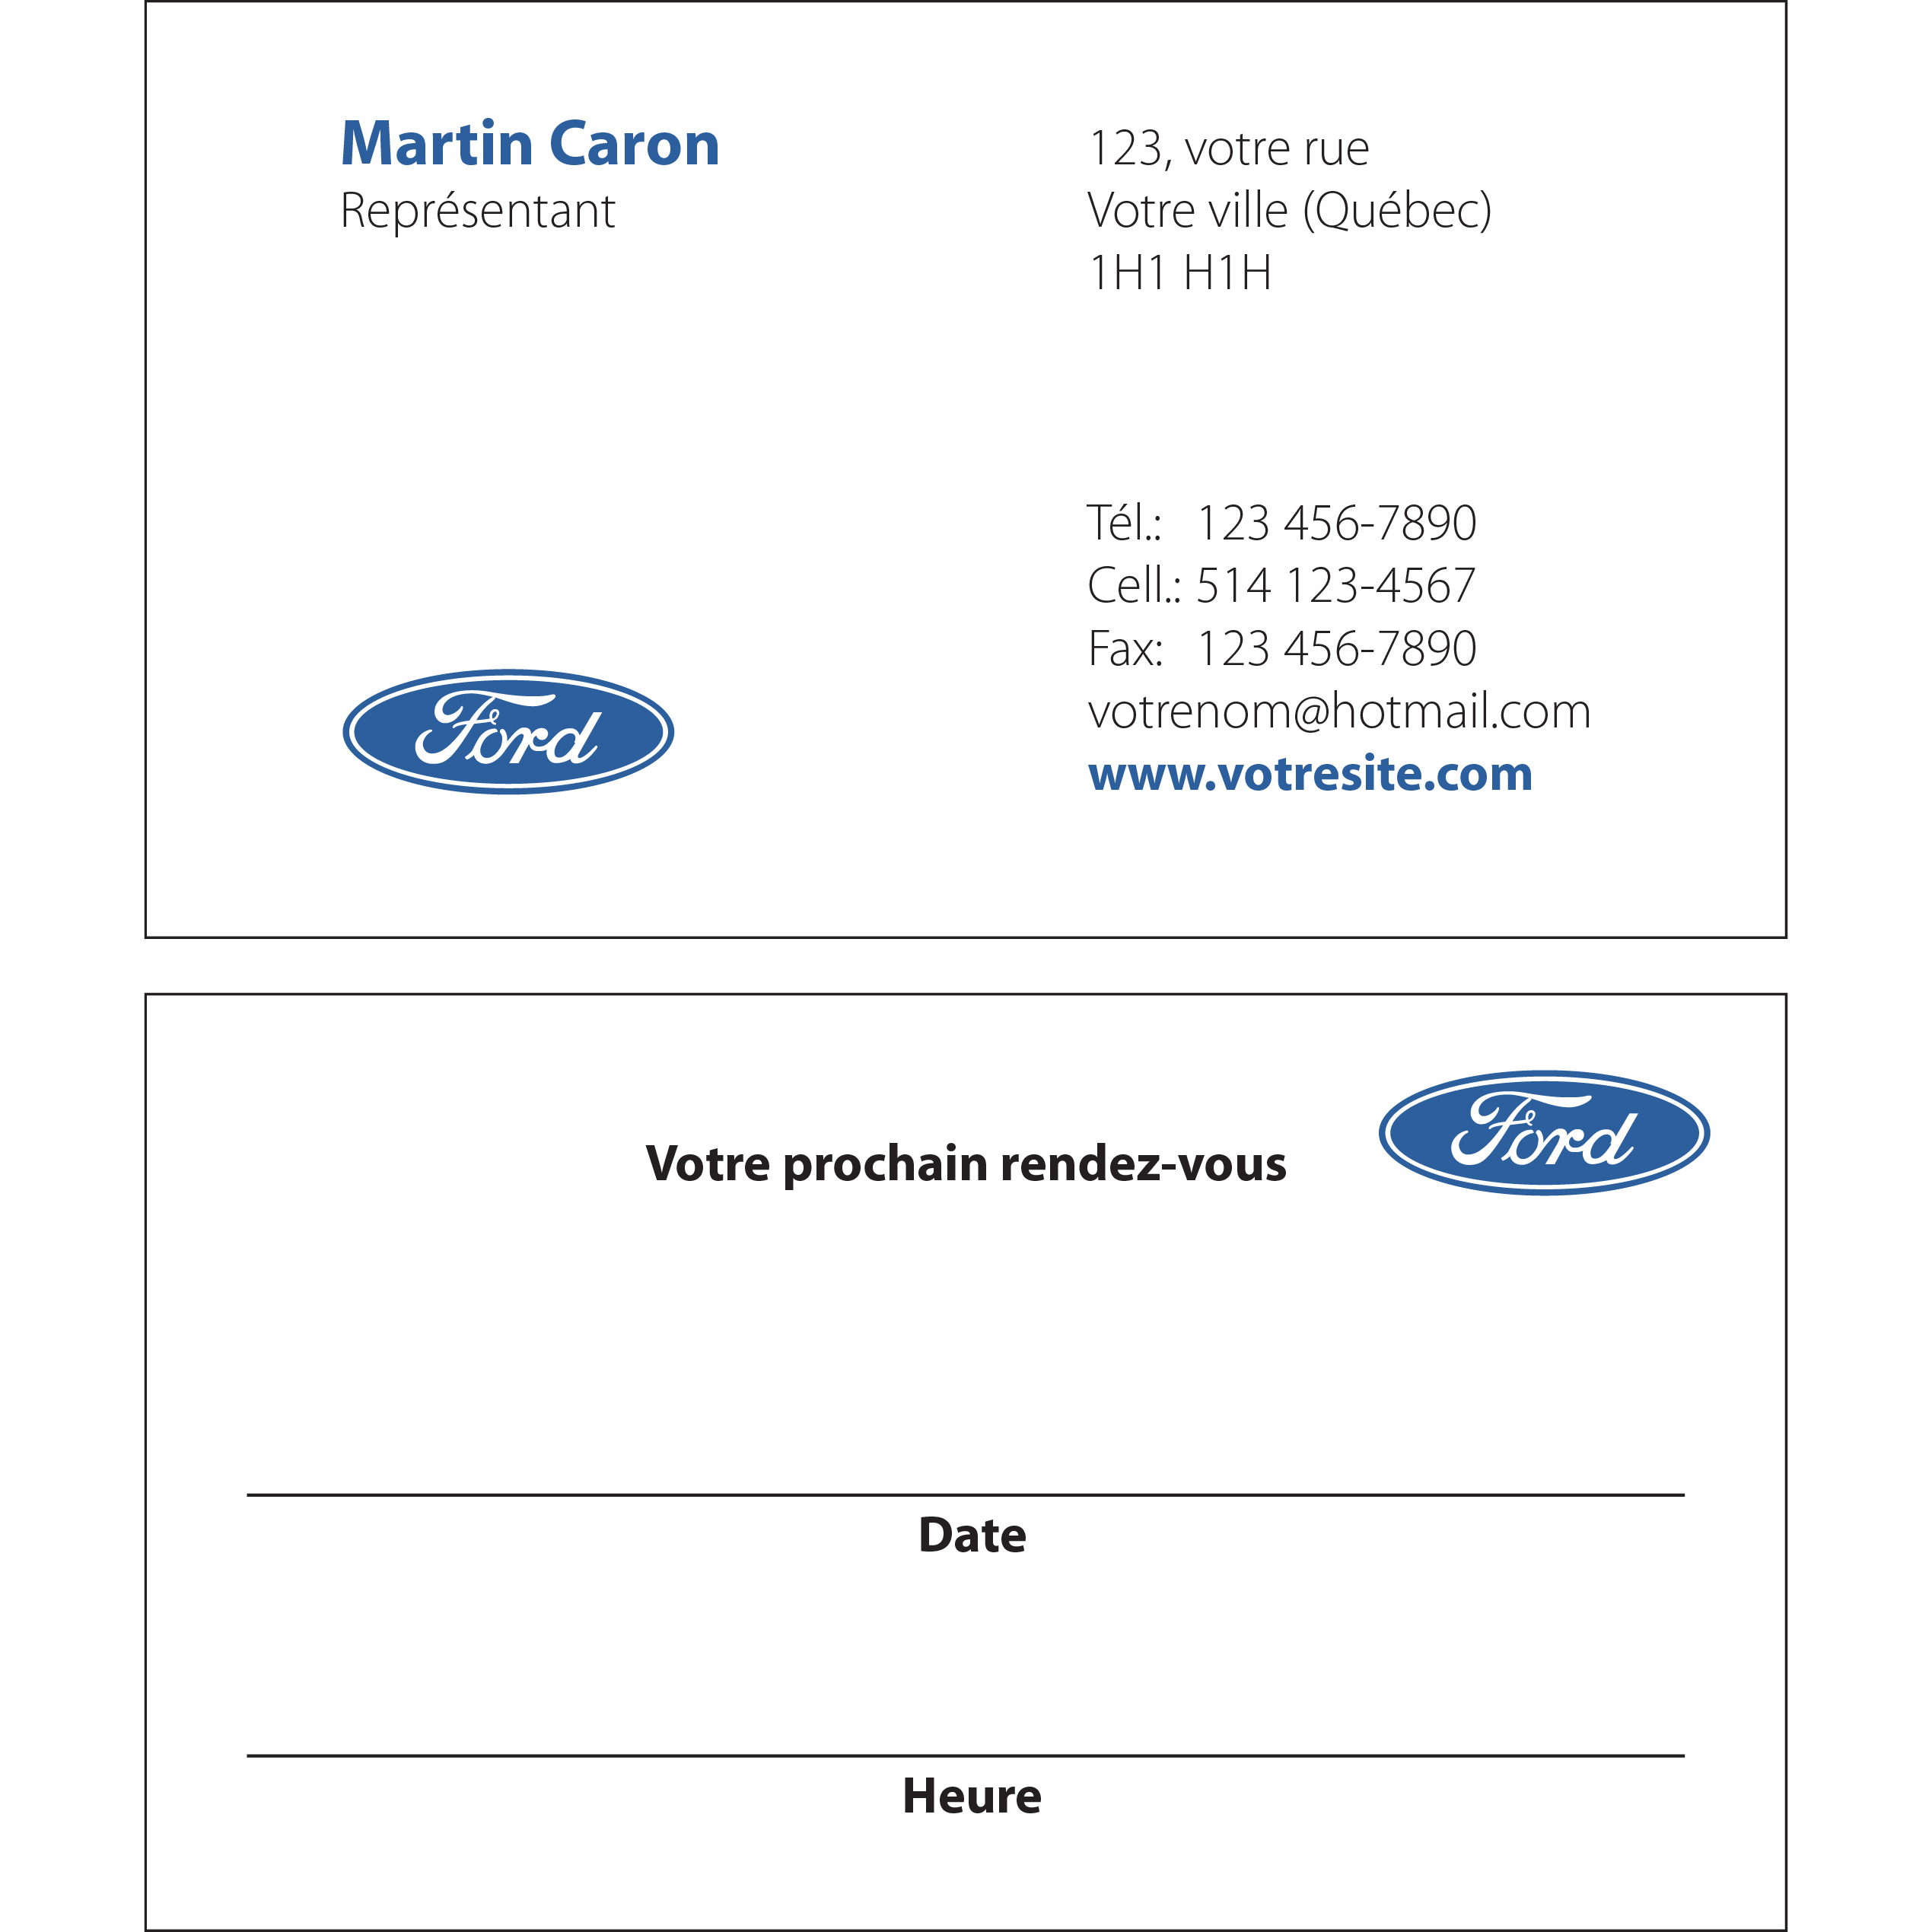 Ford Business cards - 2 sides, BCFO04